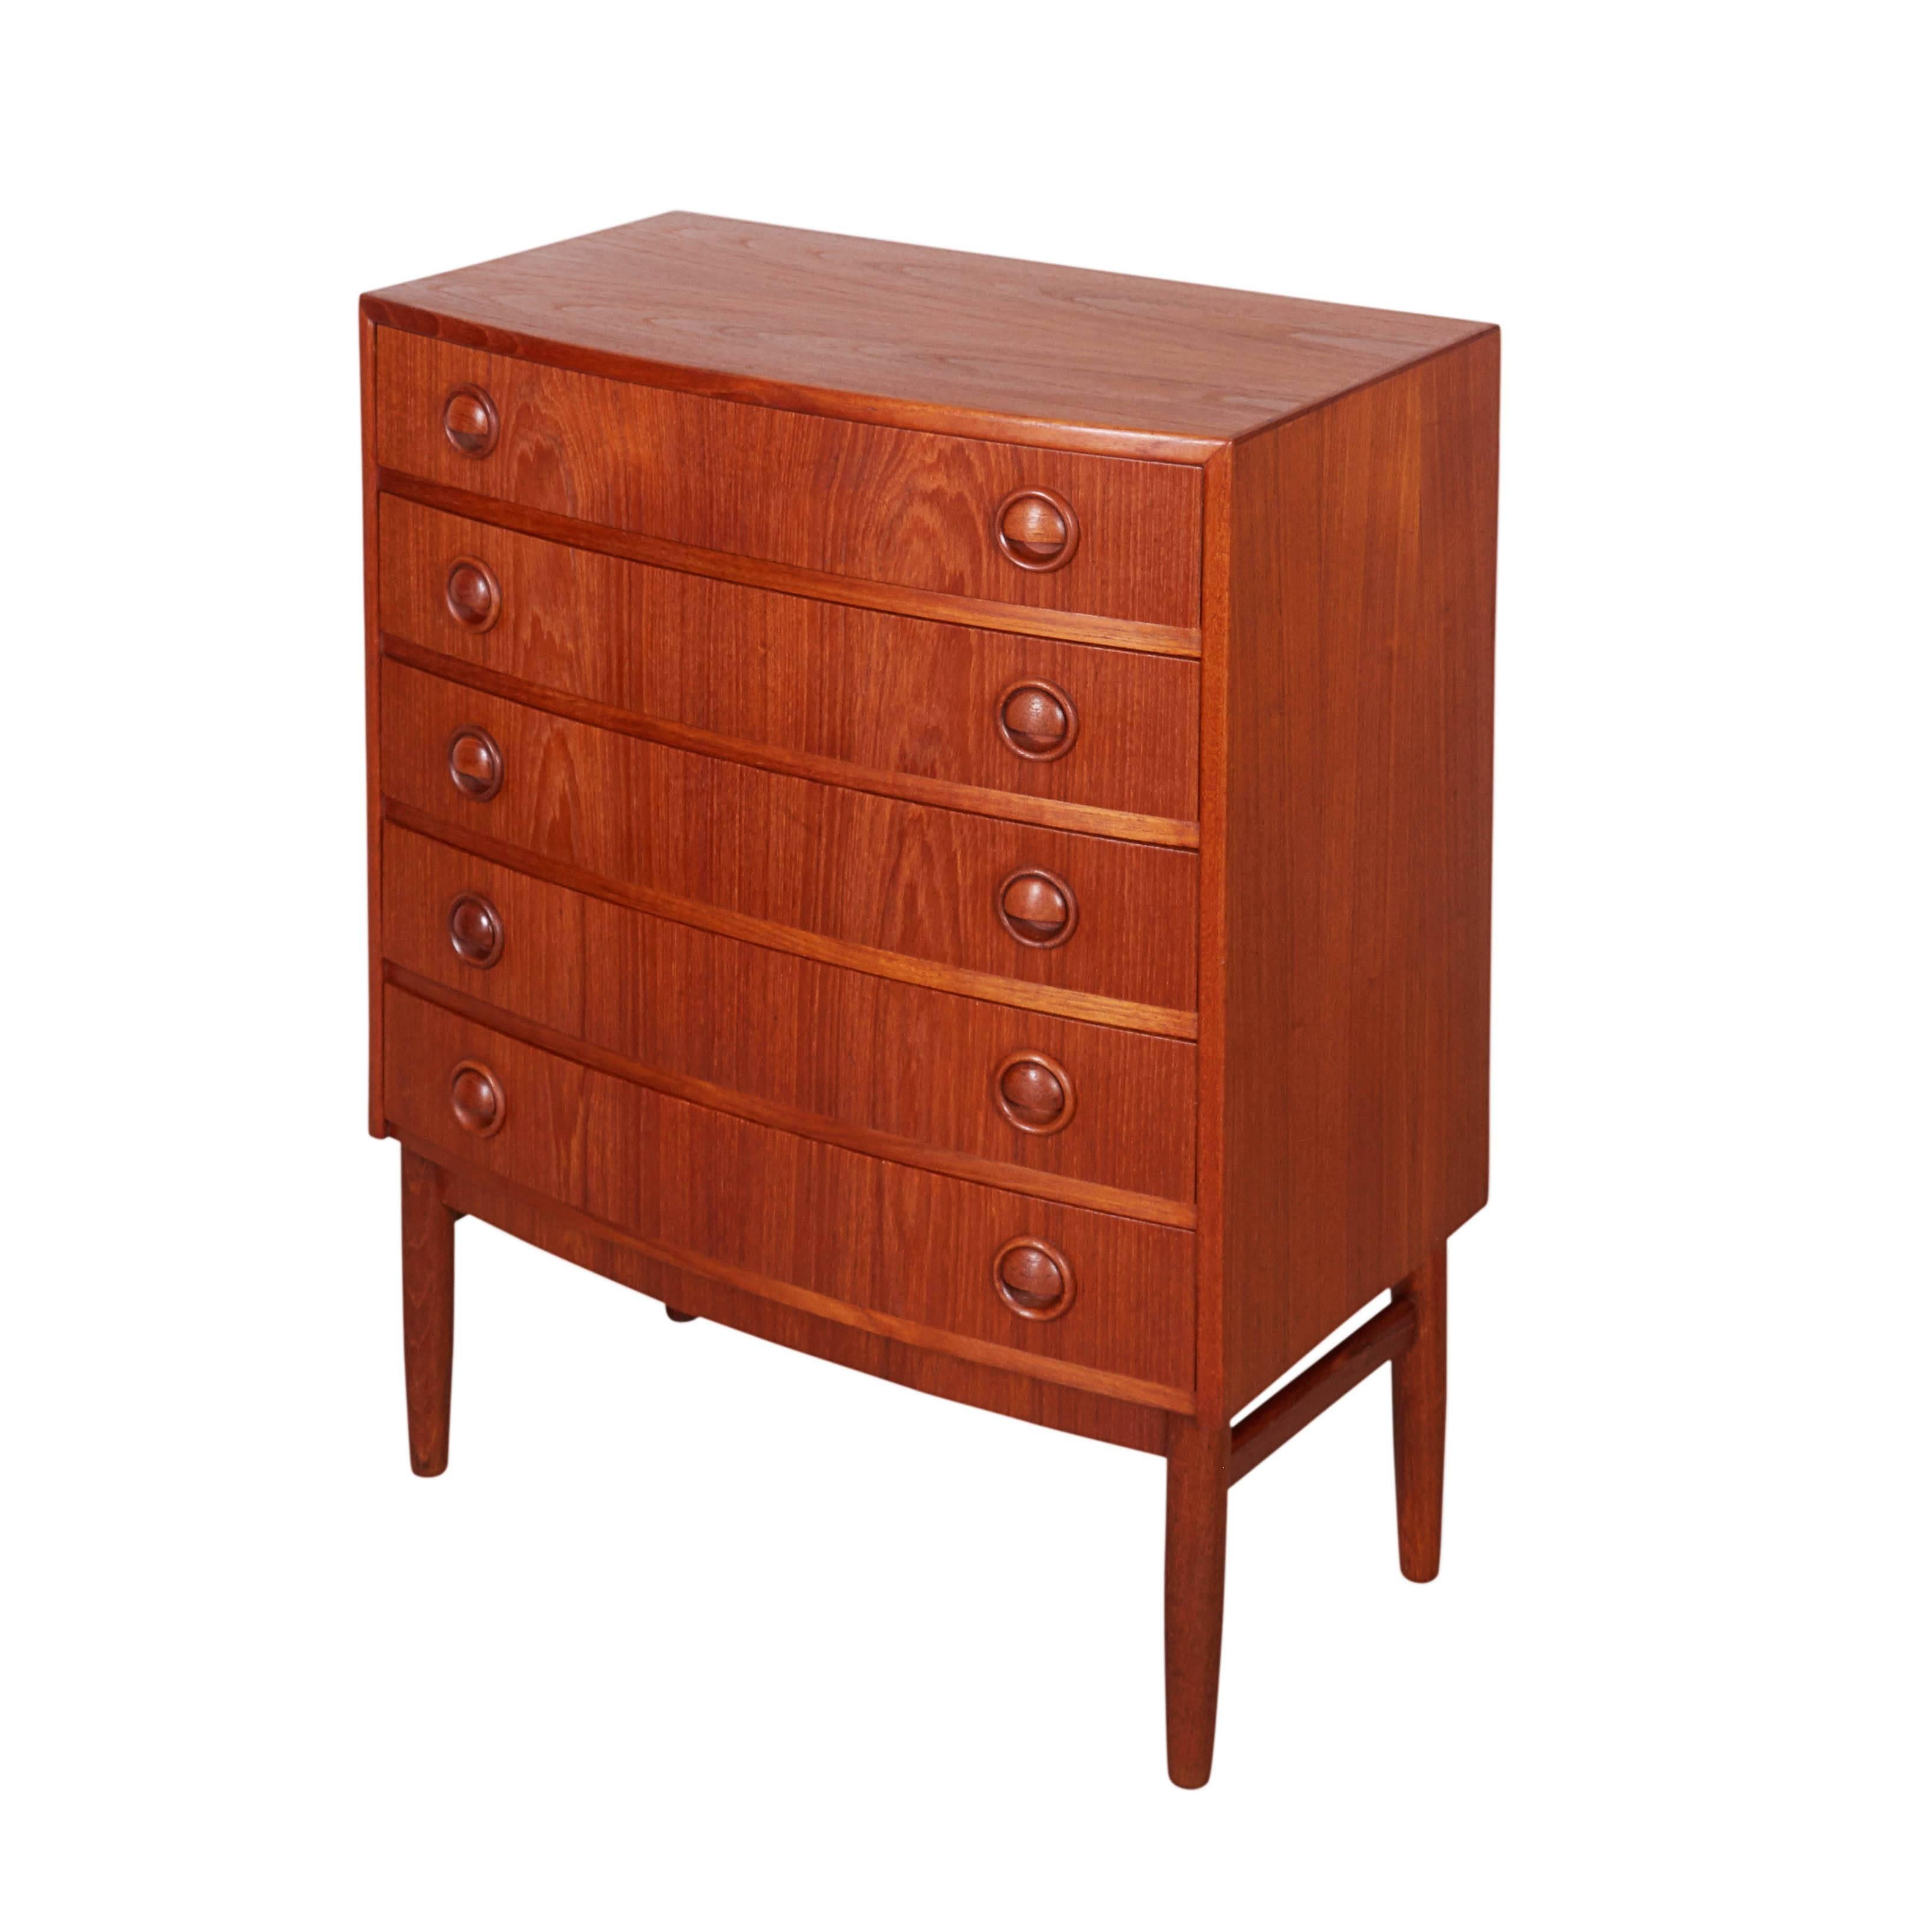 Vintage 1960s Mid Century Chest of Drawers by Kai Kristiansen

This pair of vintage dressers is in like-new condition. There are so many possibilities where this can be so much help to store things in any room of your home. Can be a large